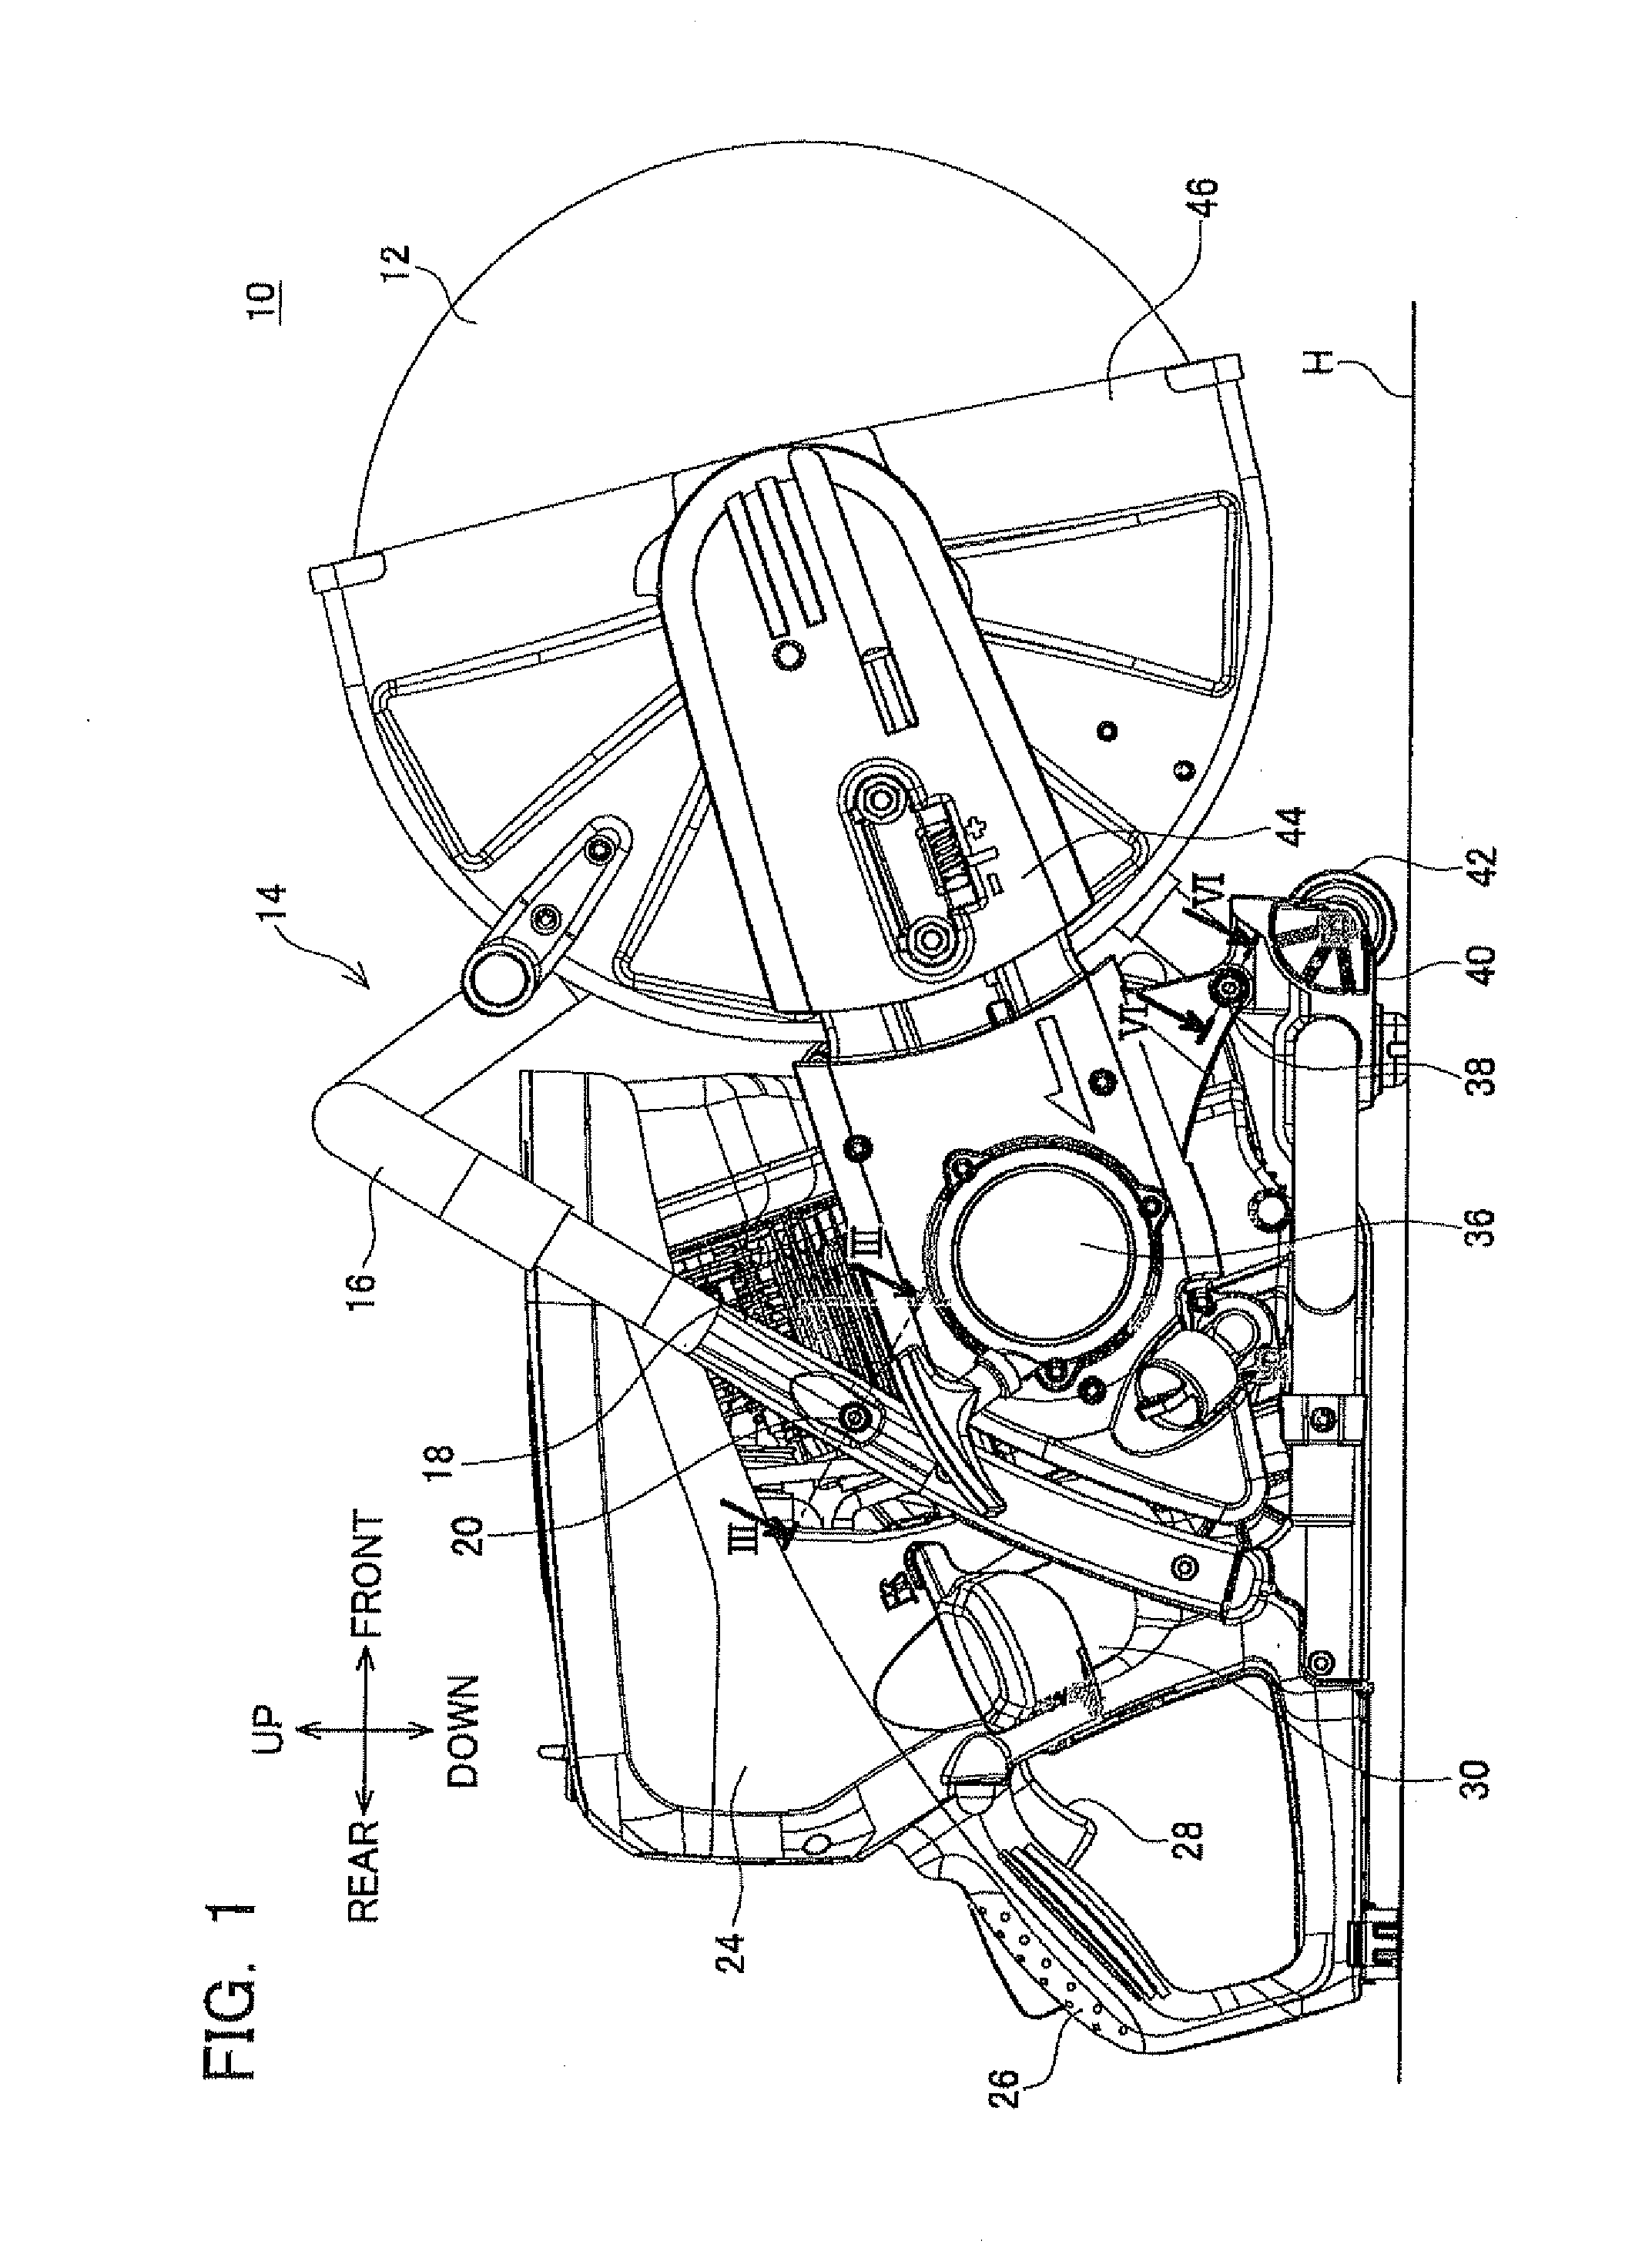 Vibration insulating device for a handheld work machine